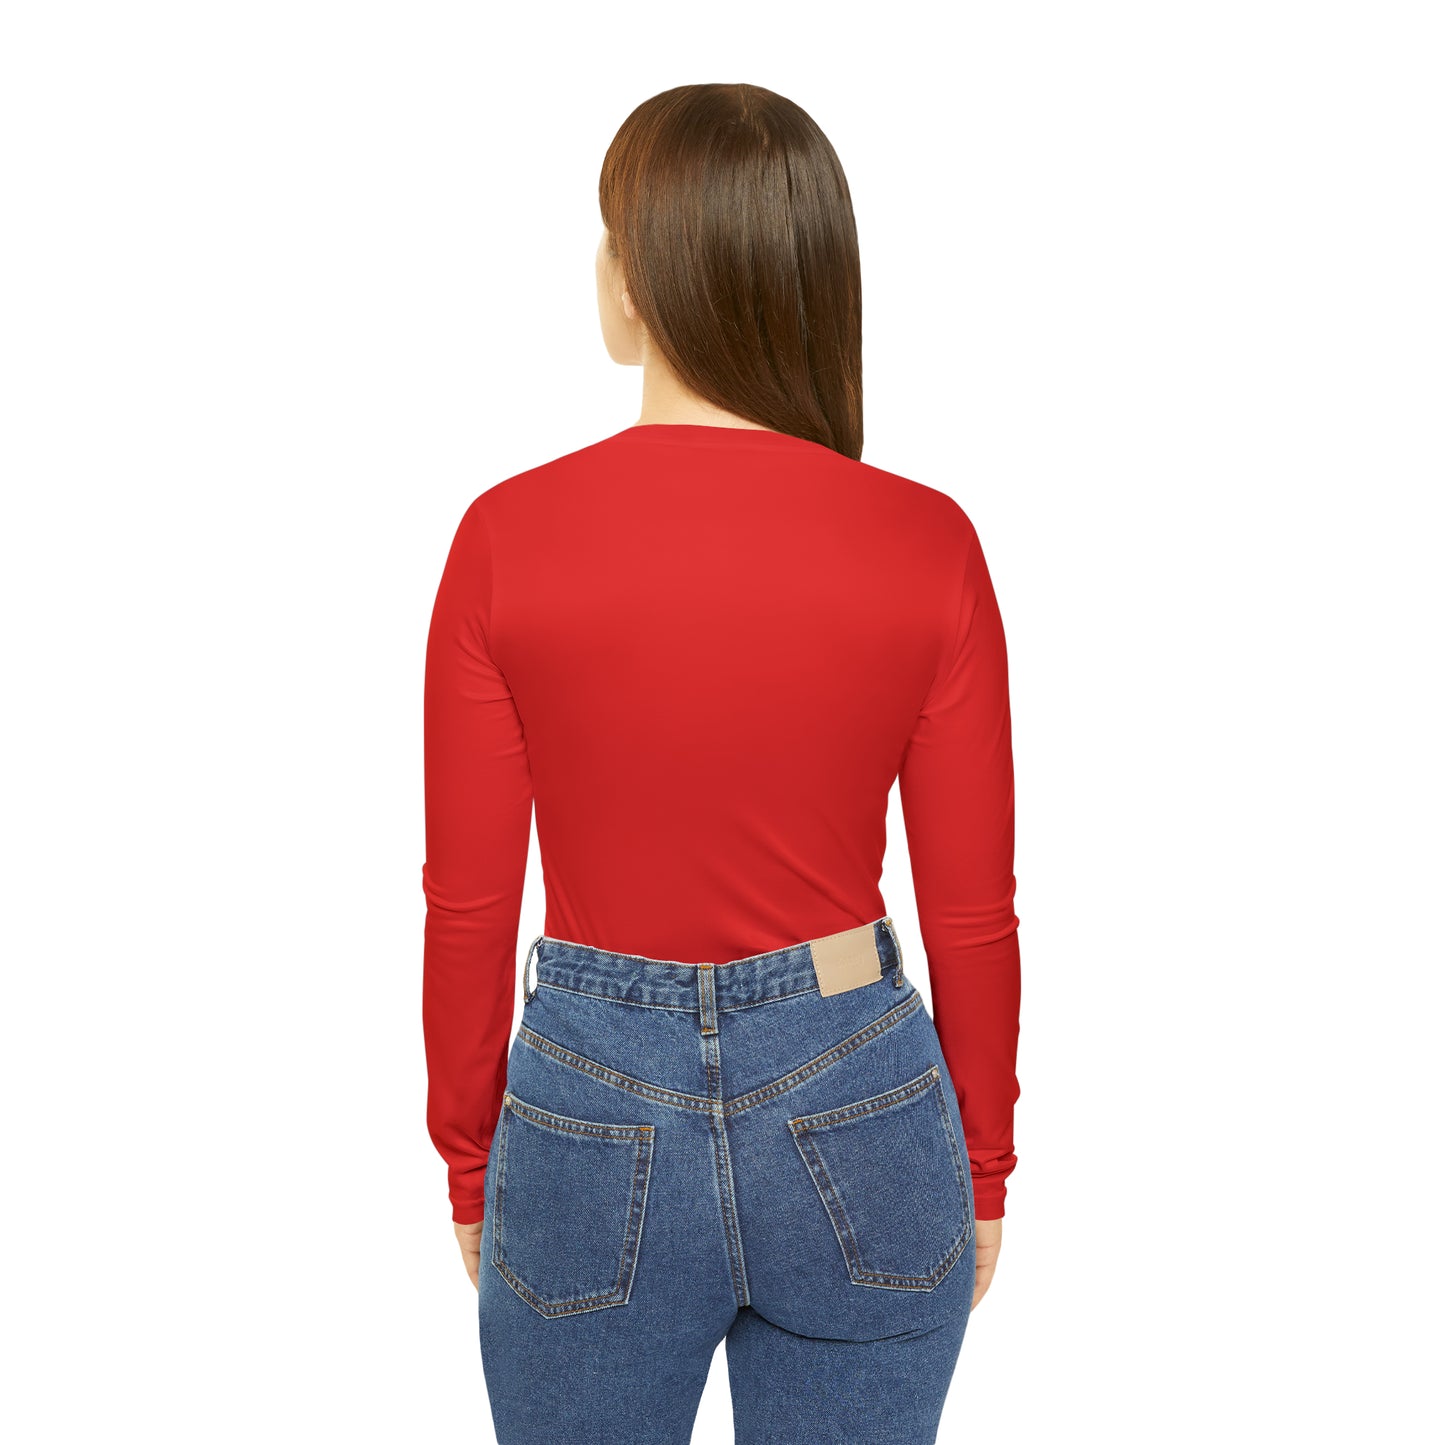 Crappy Birthday Chic Long Sleeve V-Neck Tee - Red